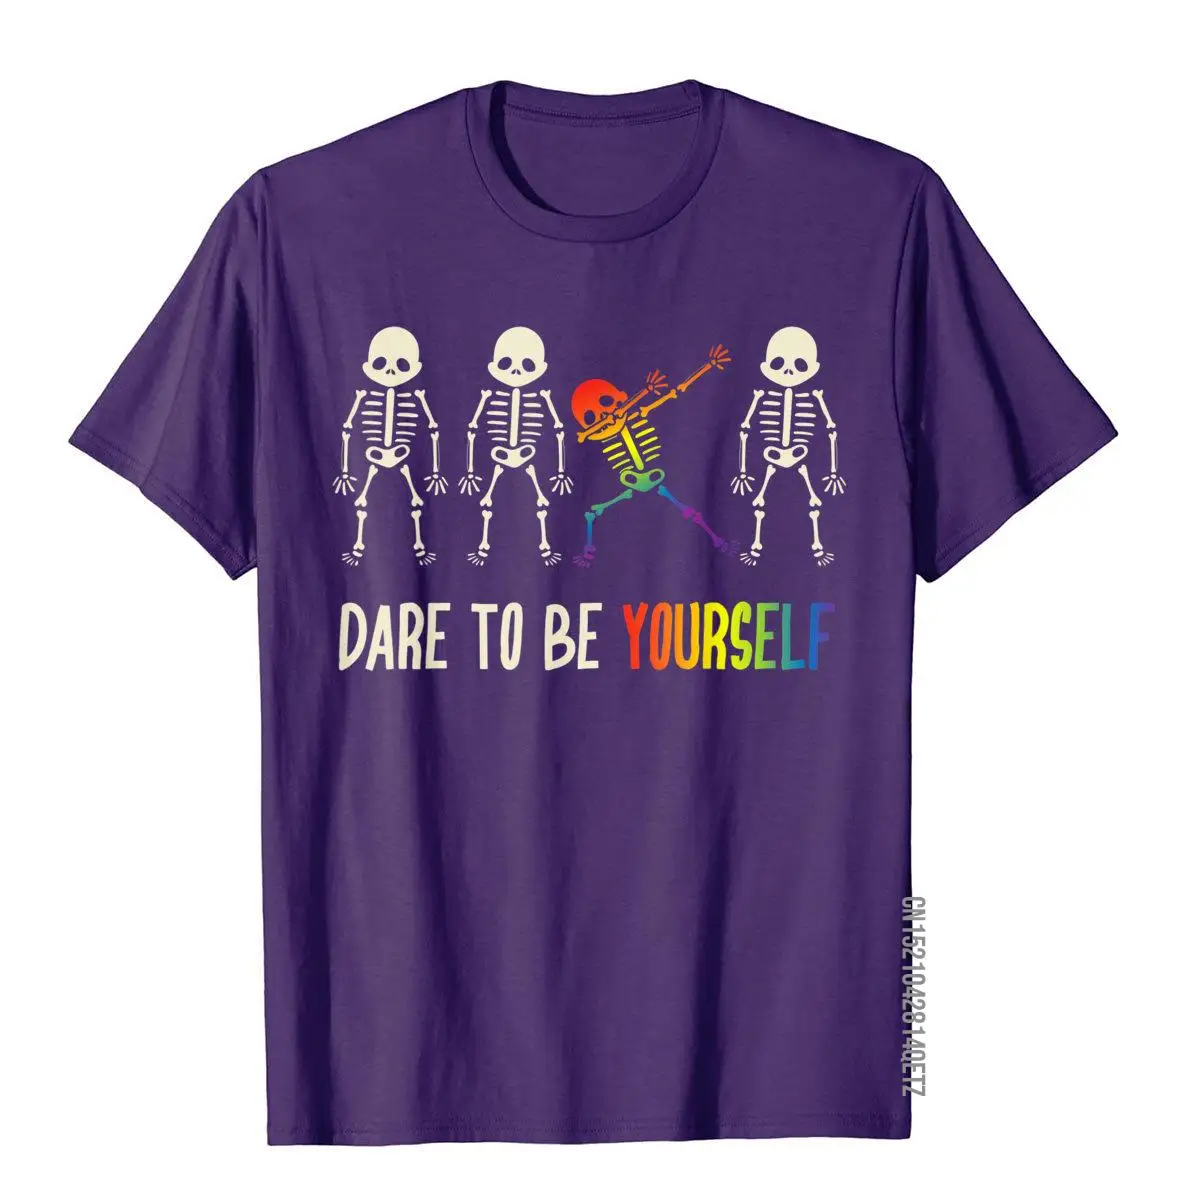 Dare To Be Yourself Shirt Cute LGBT Pride T-shirt Gift__B13626purple